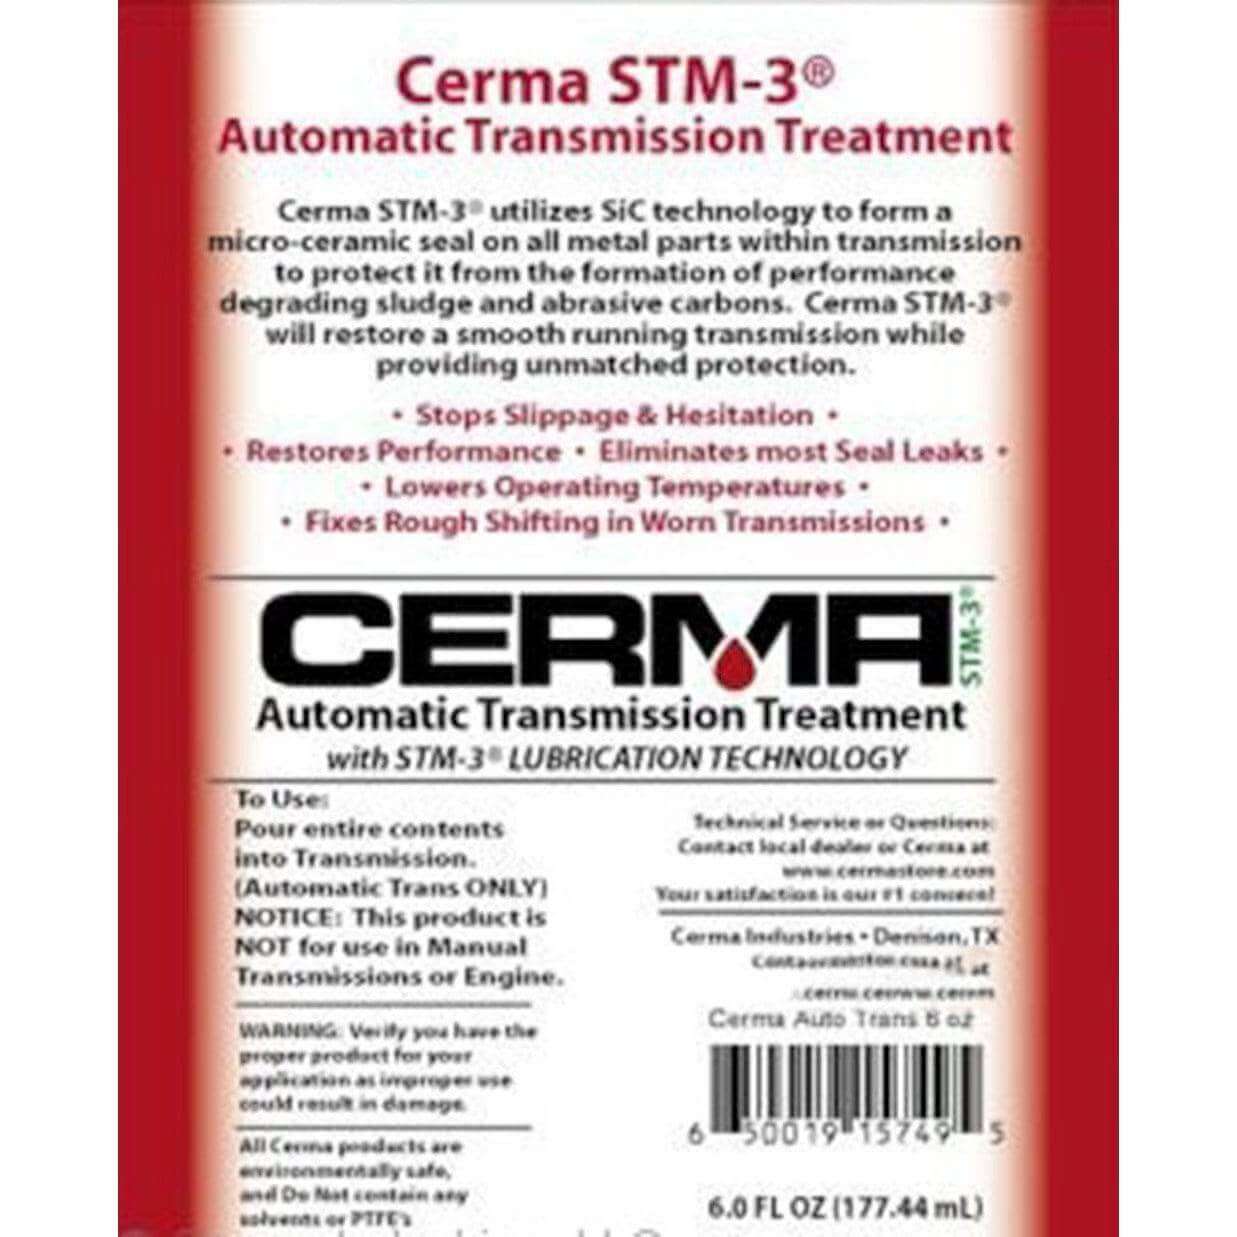 Cerma Automatic Ceramic Transmission Treatment at $70.4 only from cermatreatment.com